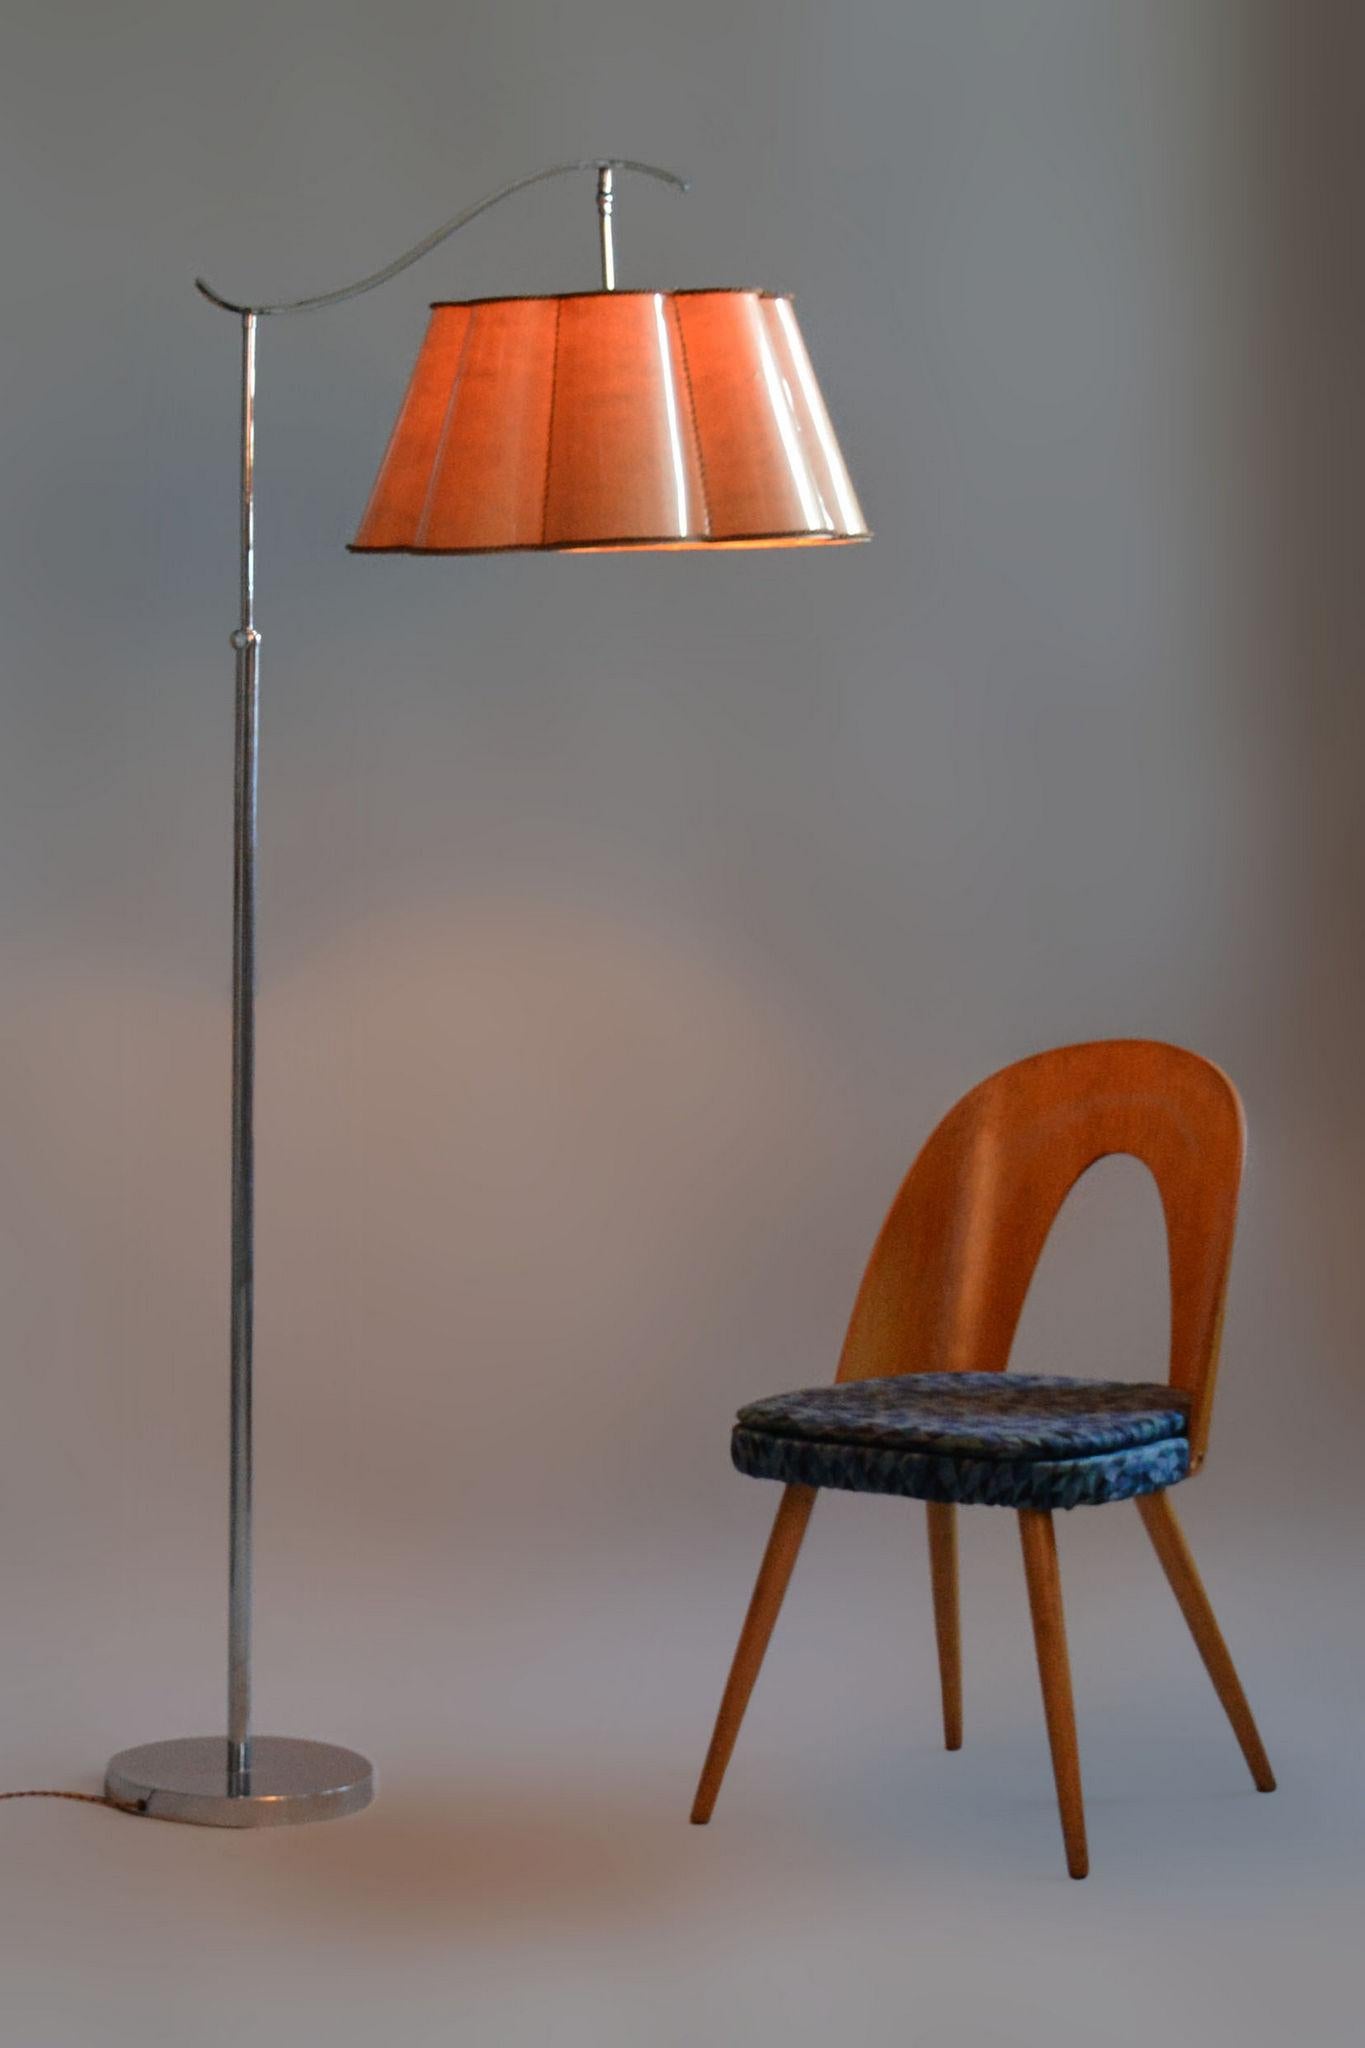 20th Century Czech Bauhaus Chrome Floor Lamp with Parchment Shade, 1920s For Sale 10